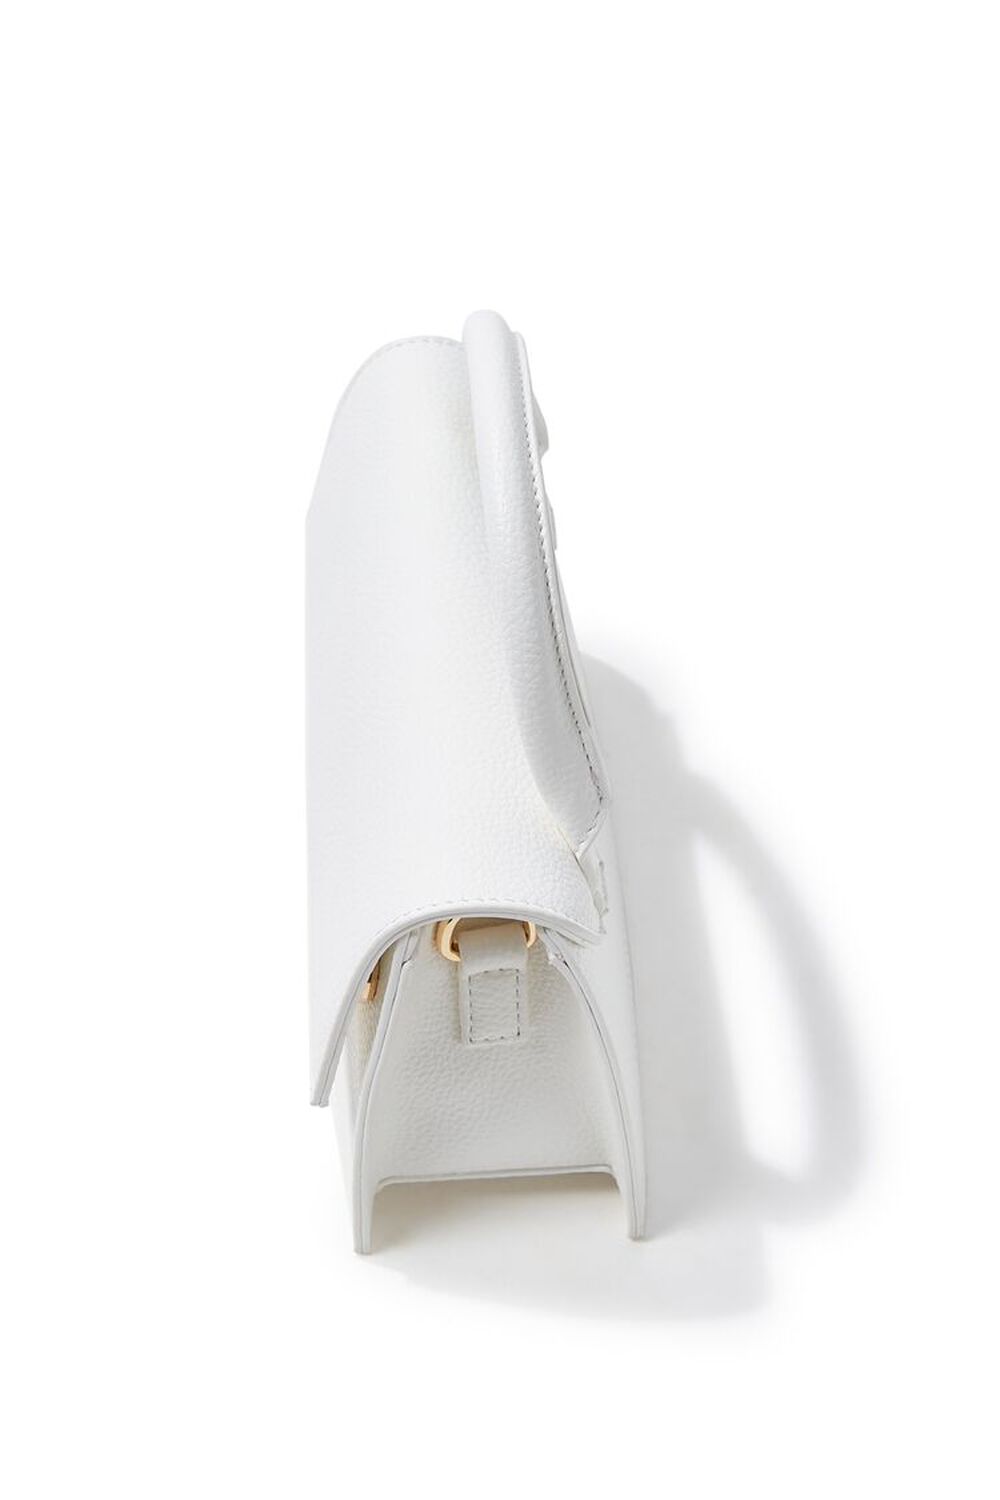 WHITE Structured Flap-Top Crossbody Bag, image 2